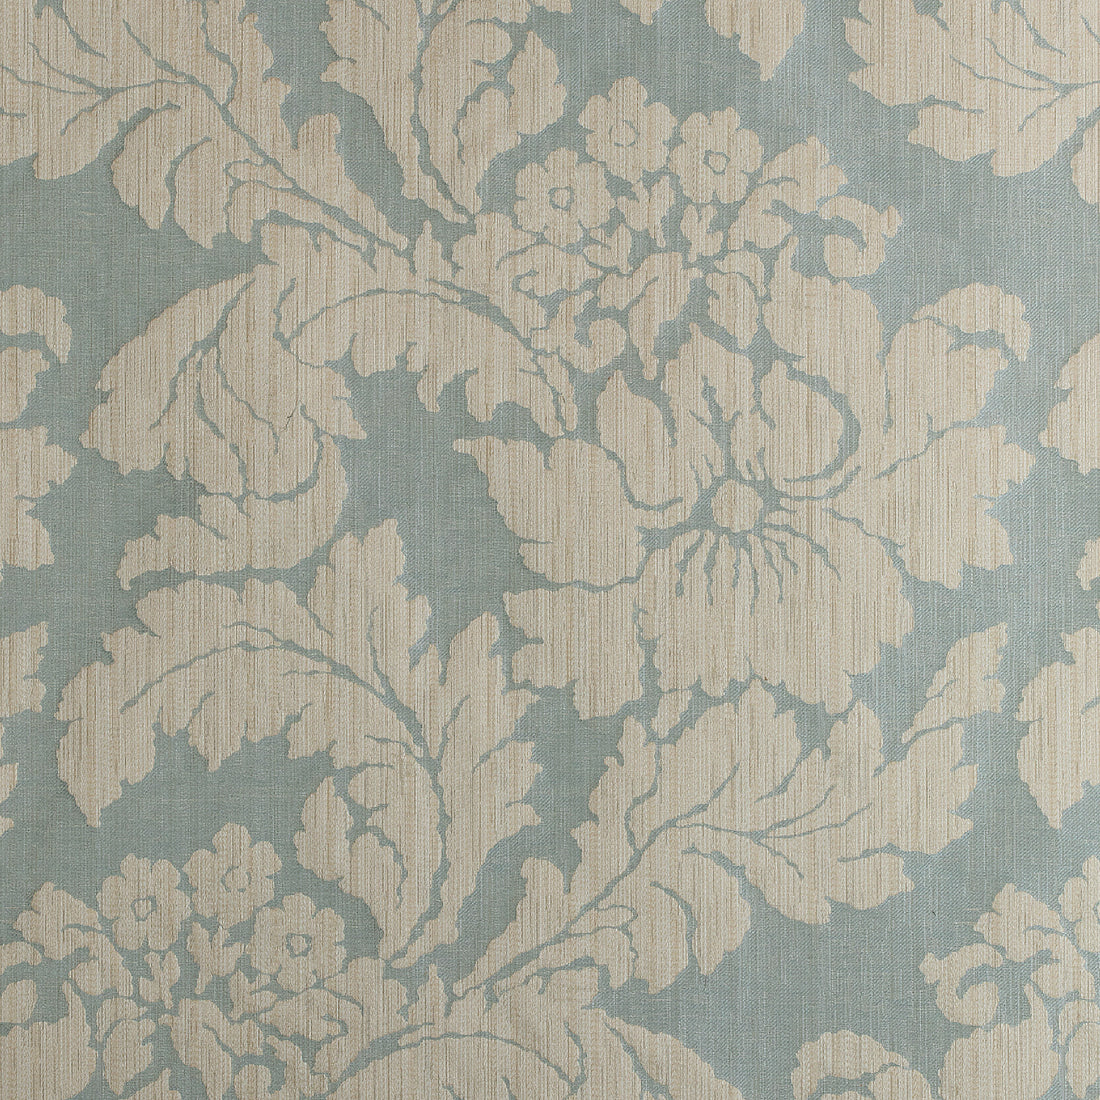 Caserta Damask fabric in aqua color - pattern number AW72982 - by Anna French in the Manor collection